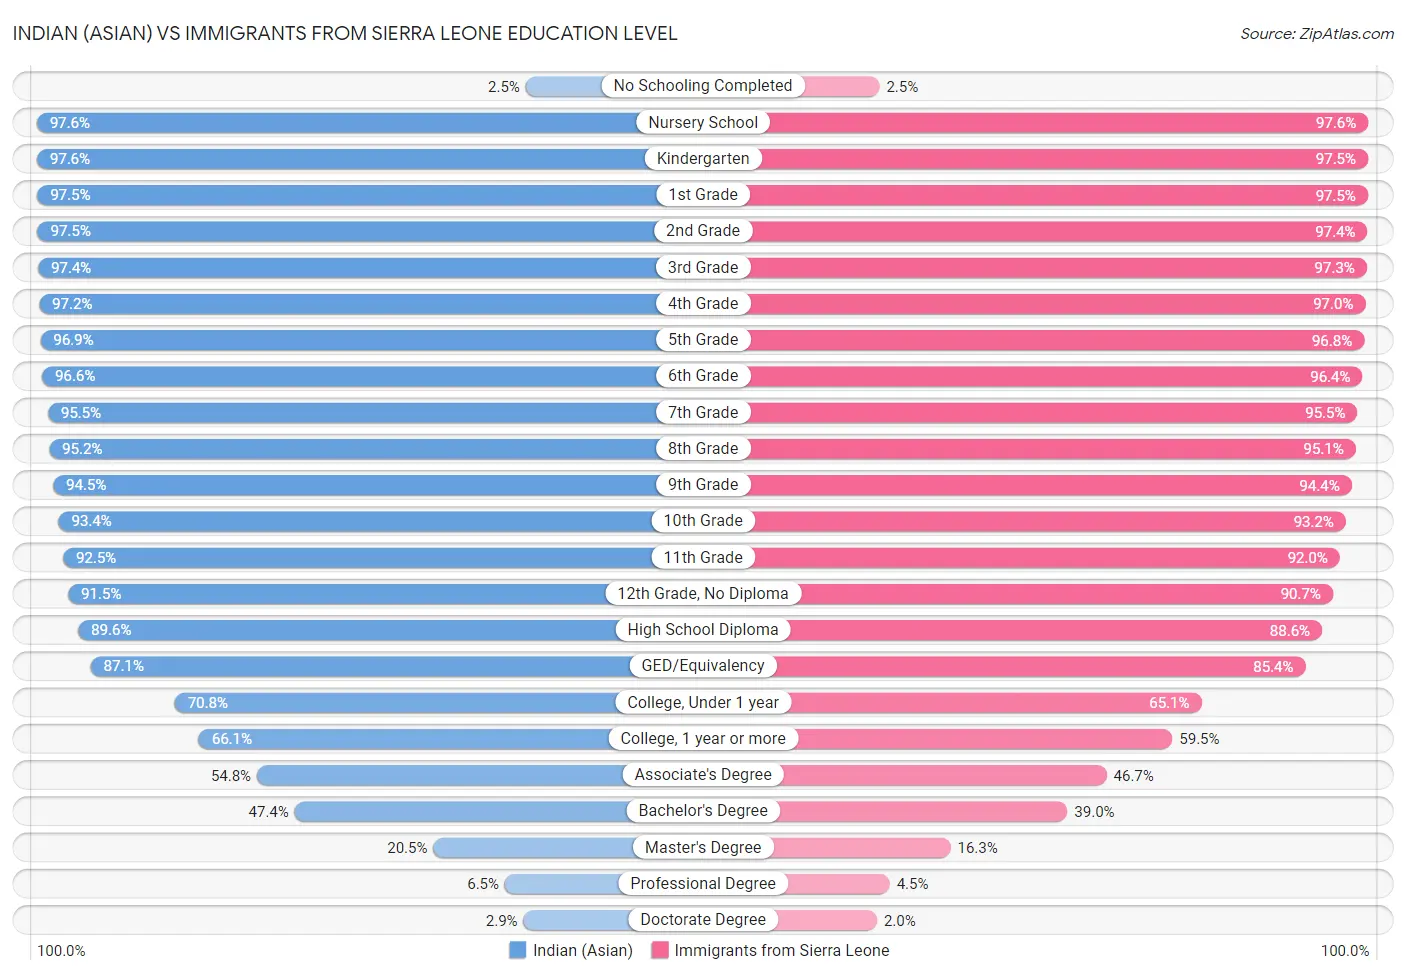 Indian (Asian) vs Immigrants from Sierra Leone Education Level